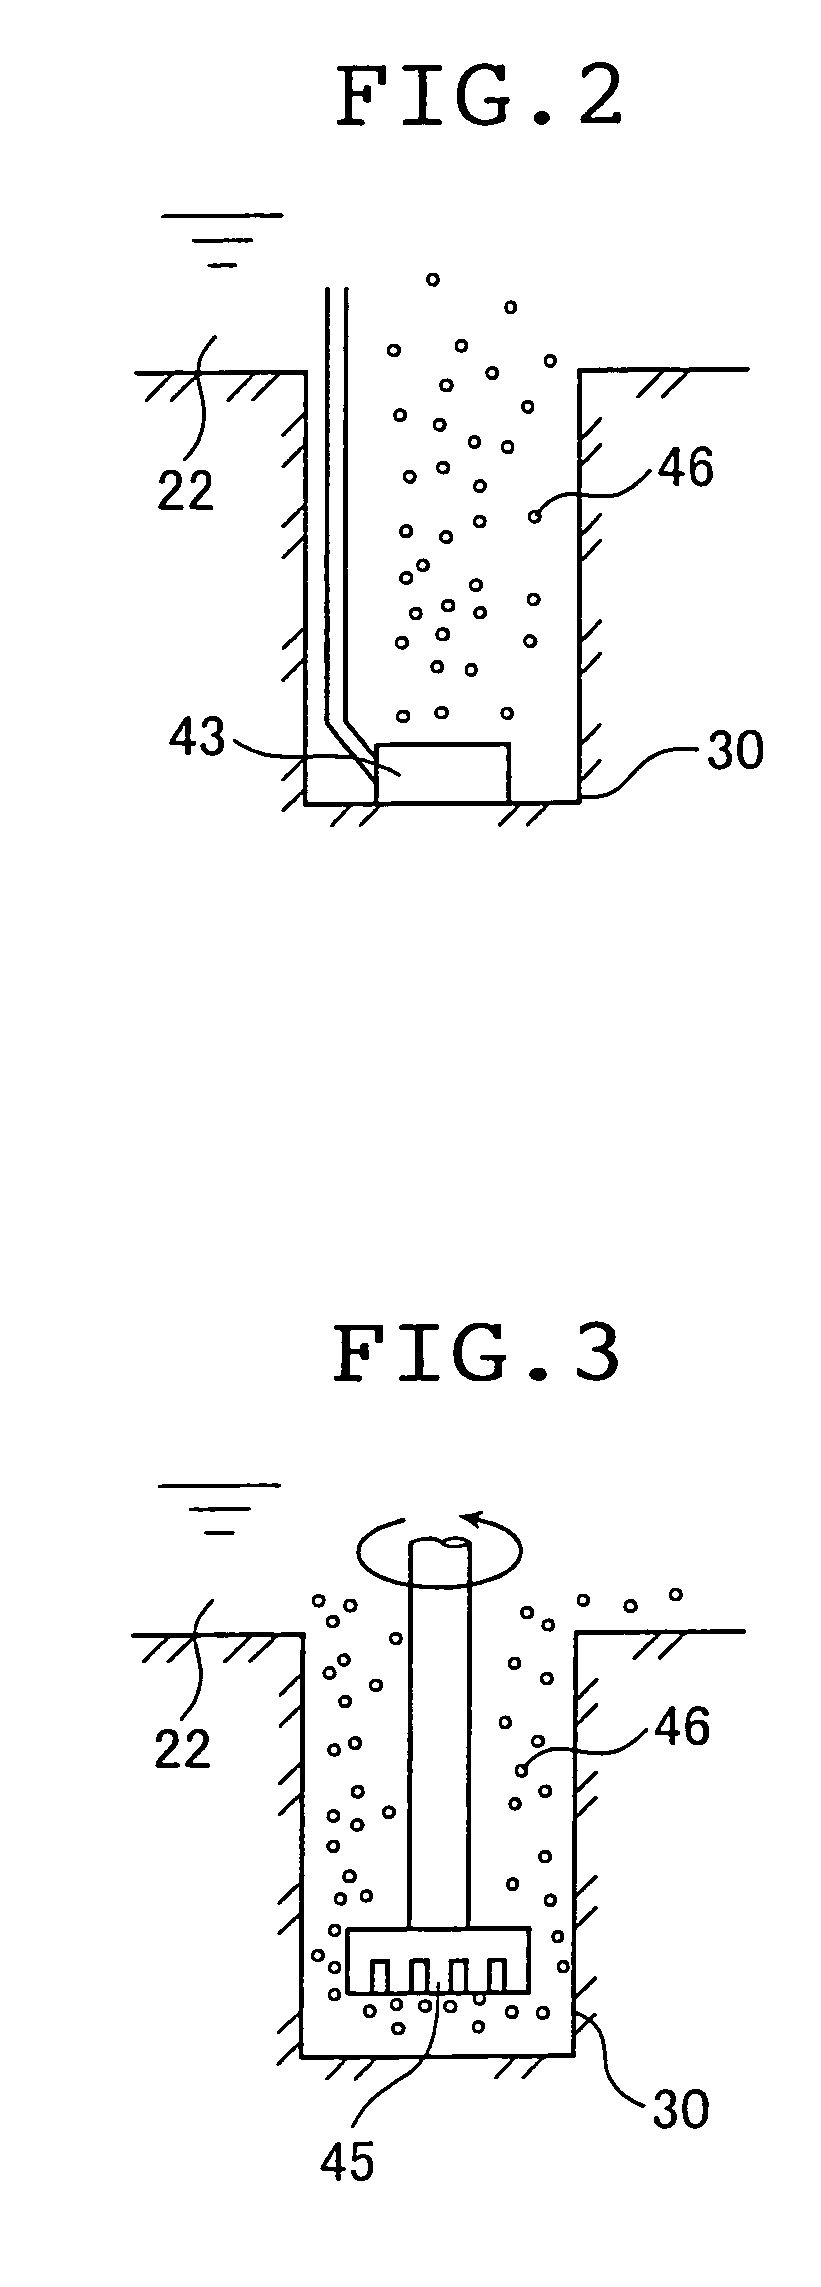 Method of manufacturing a support for a lithographic printing plate